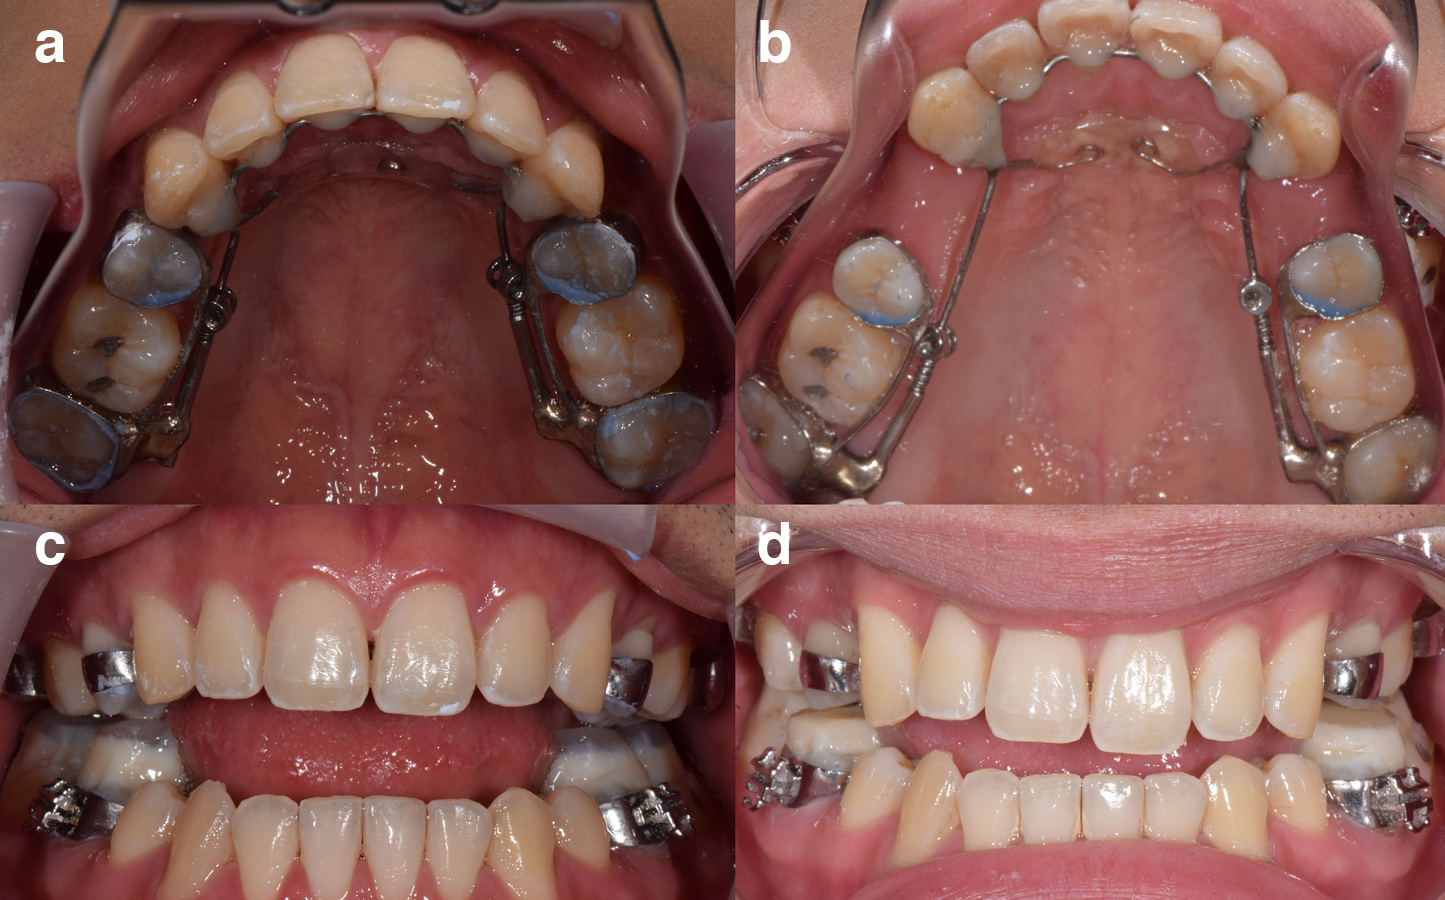 Four photos of a man's teeth while wearing an AGGA device are seen. The photos are labeled A, B, C and D.